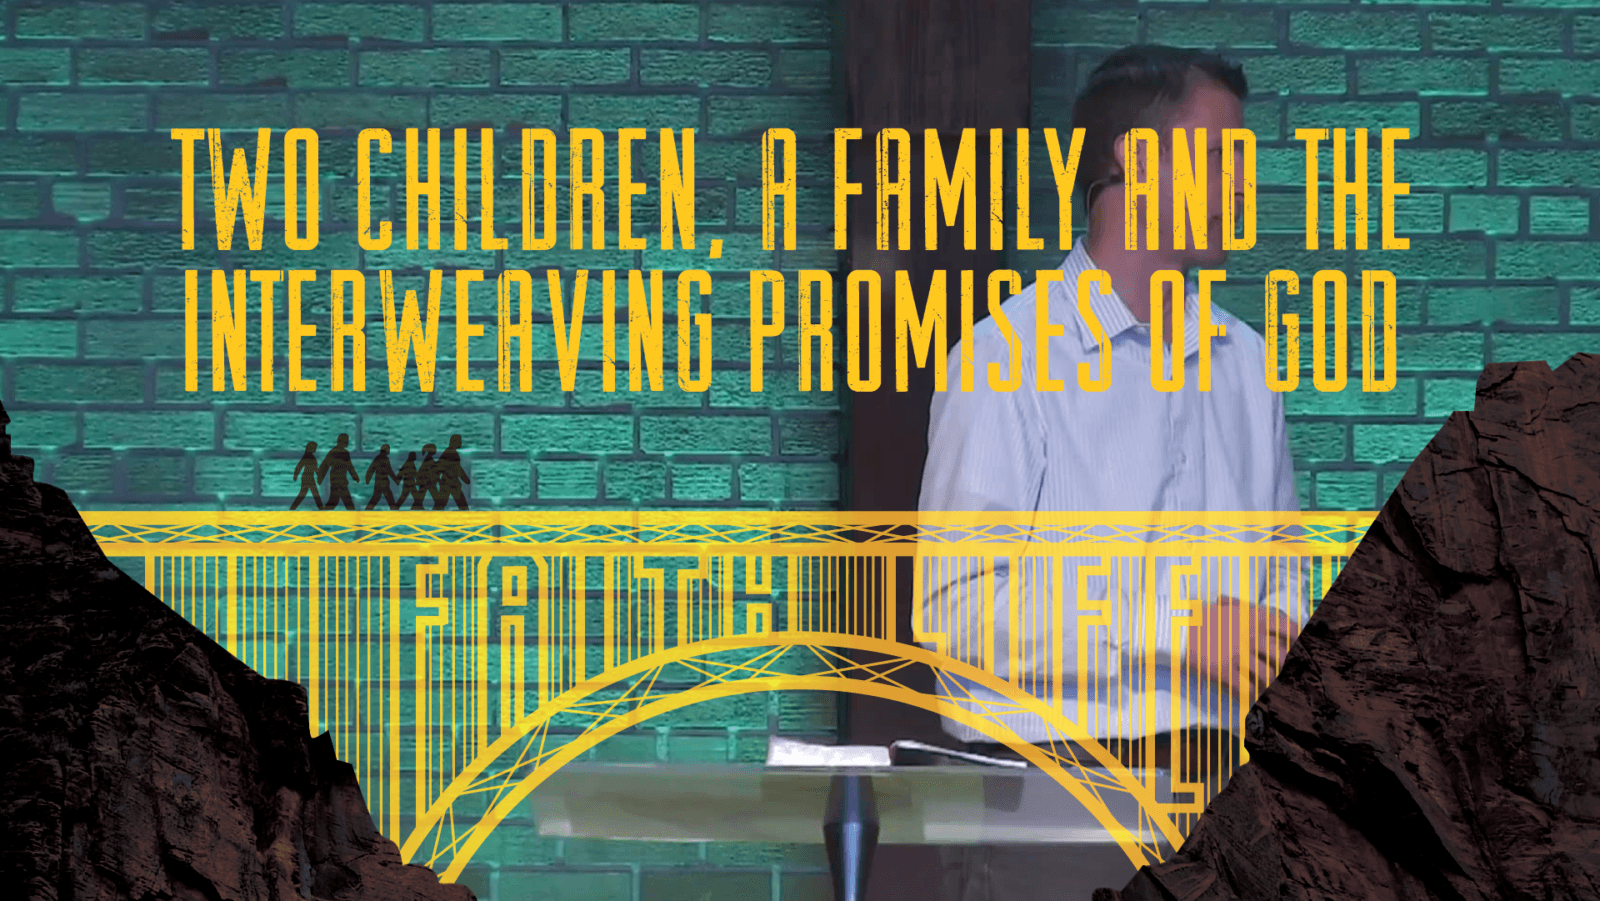 Two Children, a Family and the Interweaving Promises of God